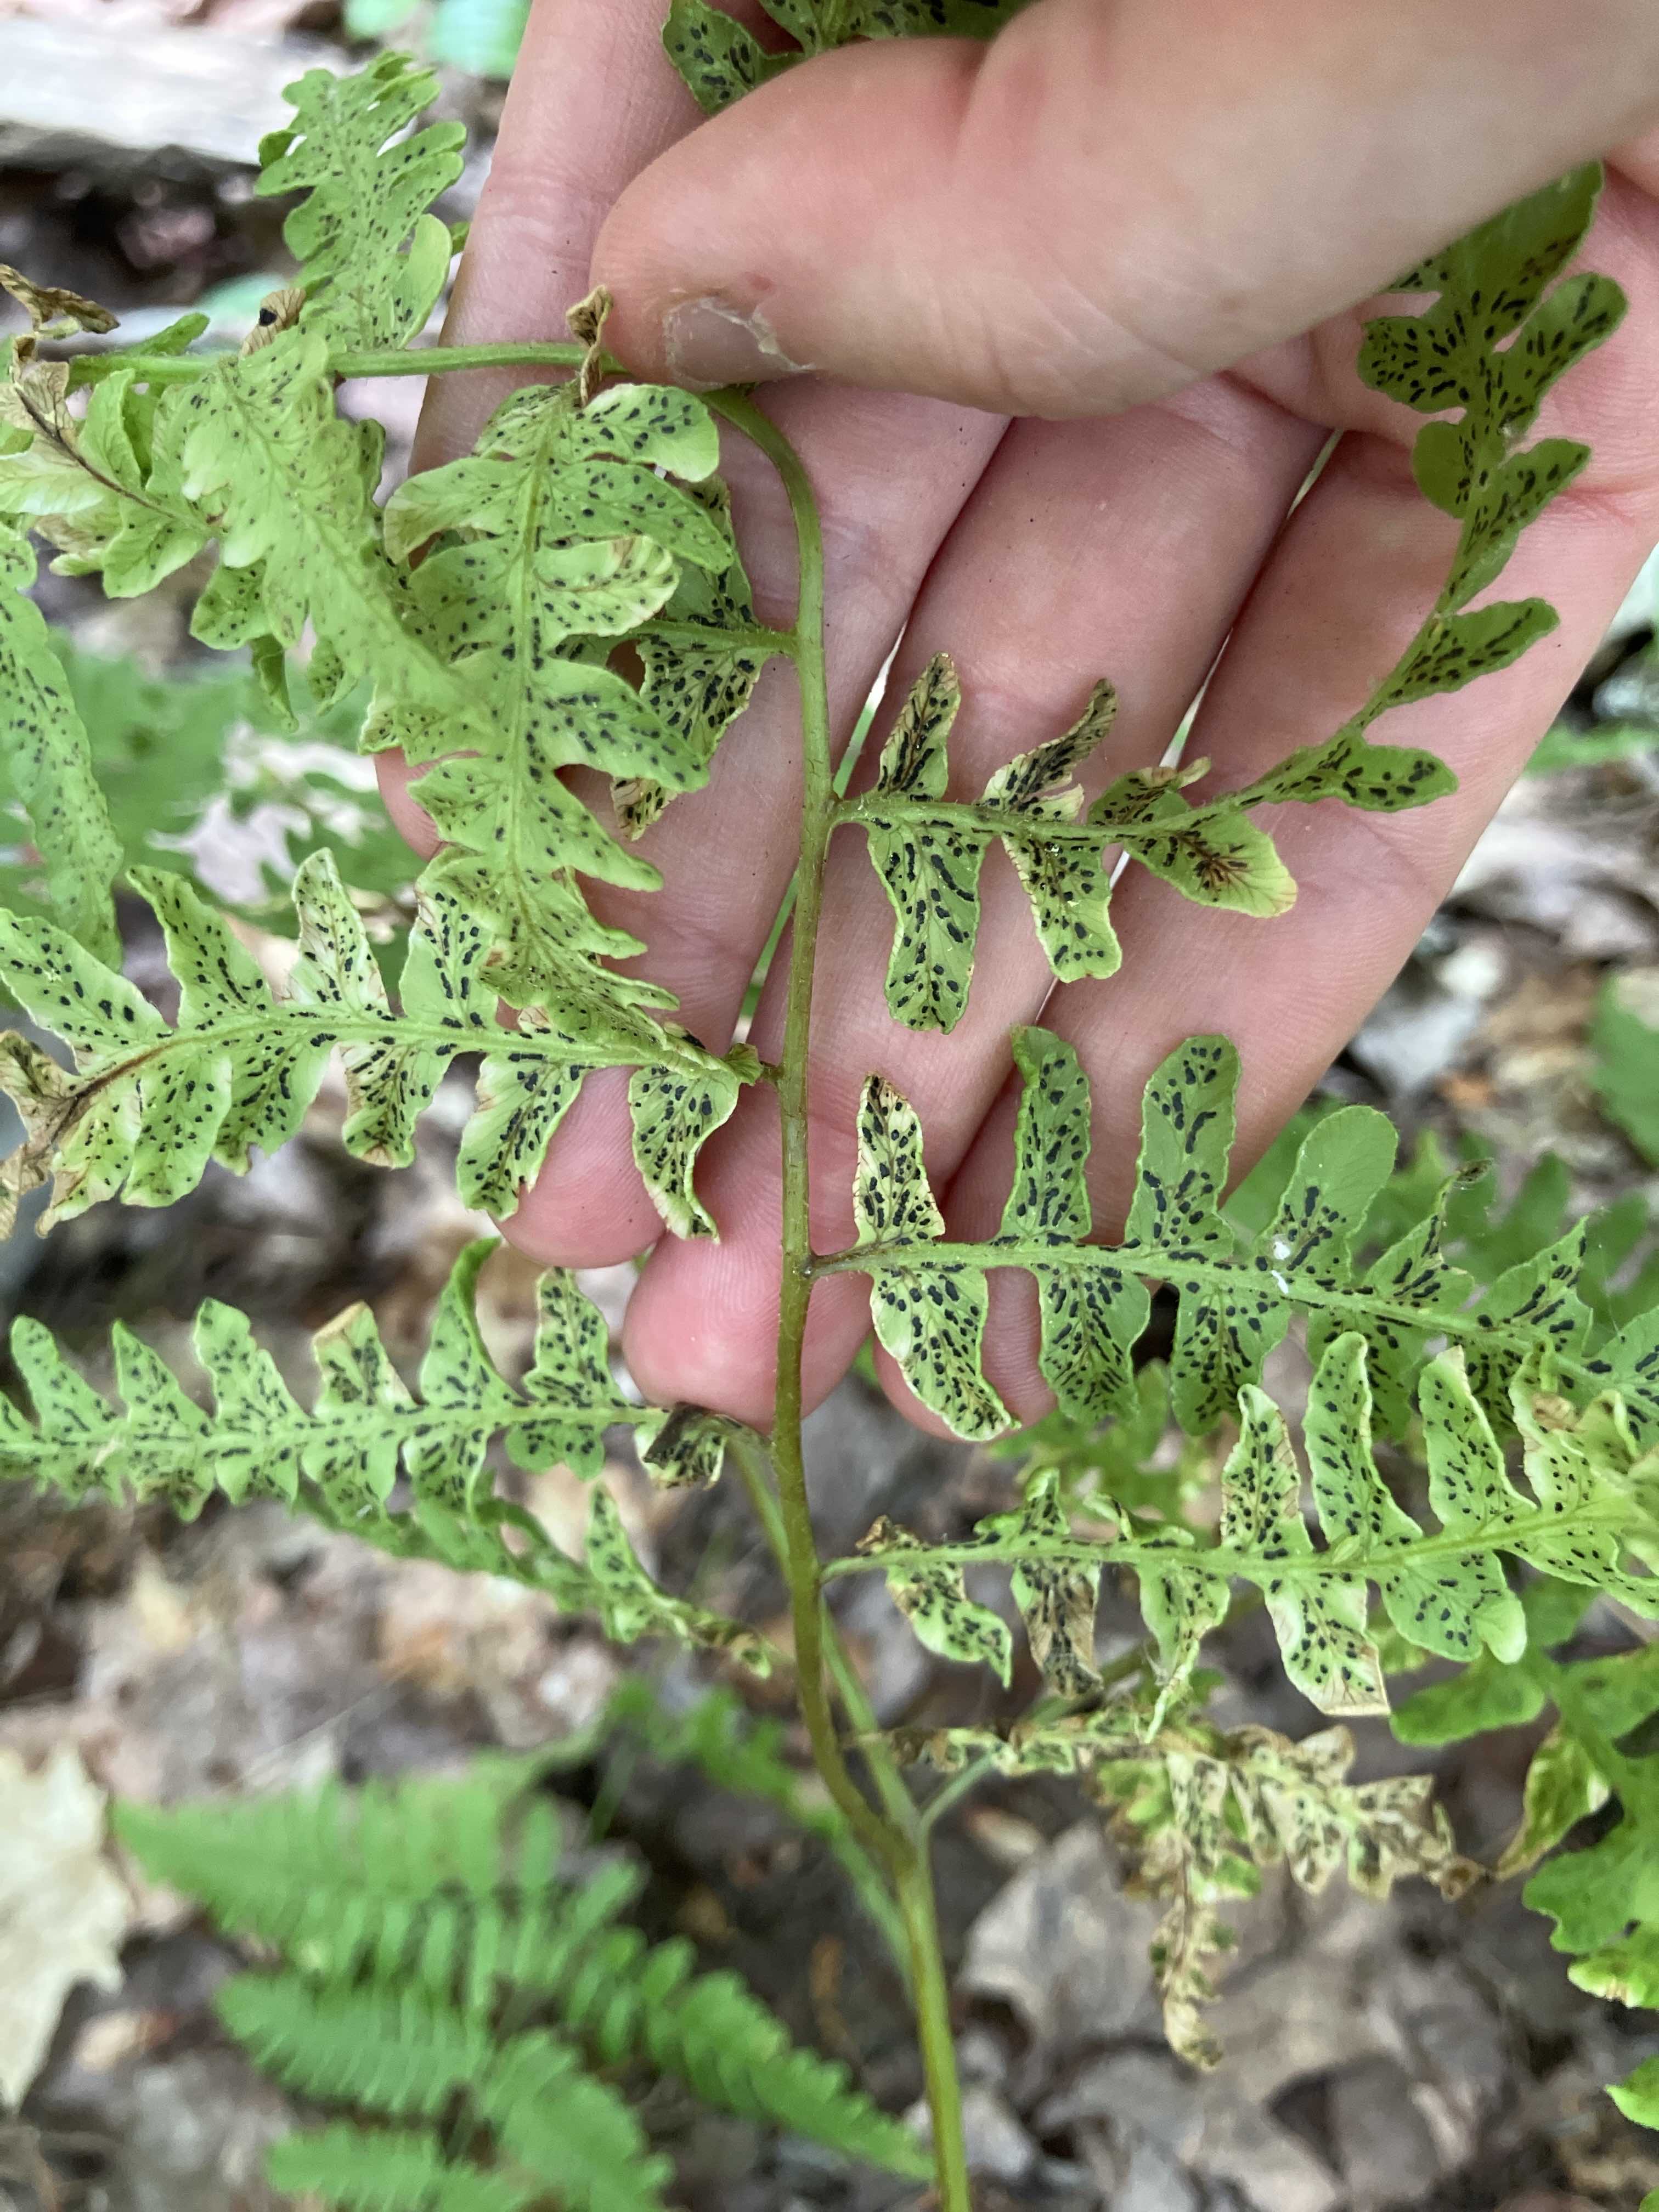 Cryptomycina pteridis - a "lost" plant parasitic lineage found at UMBS